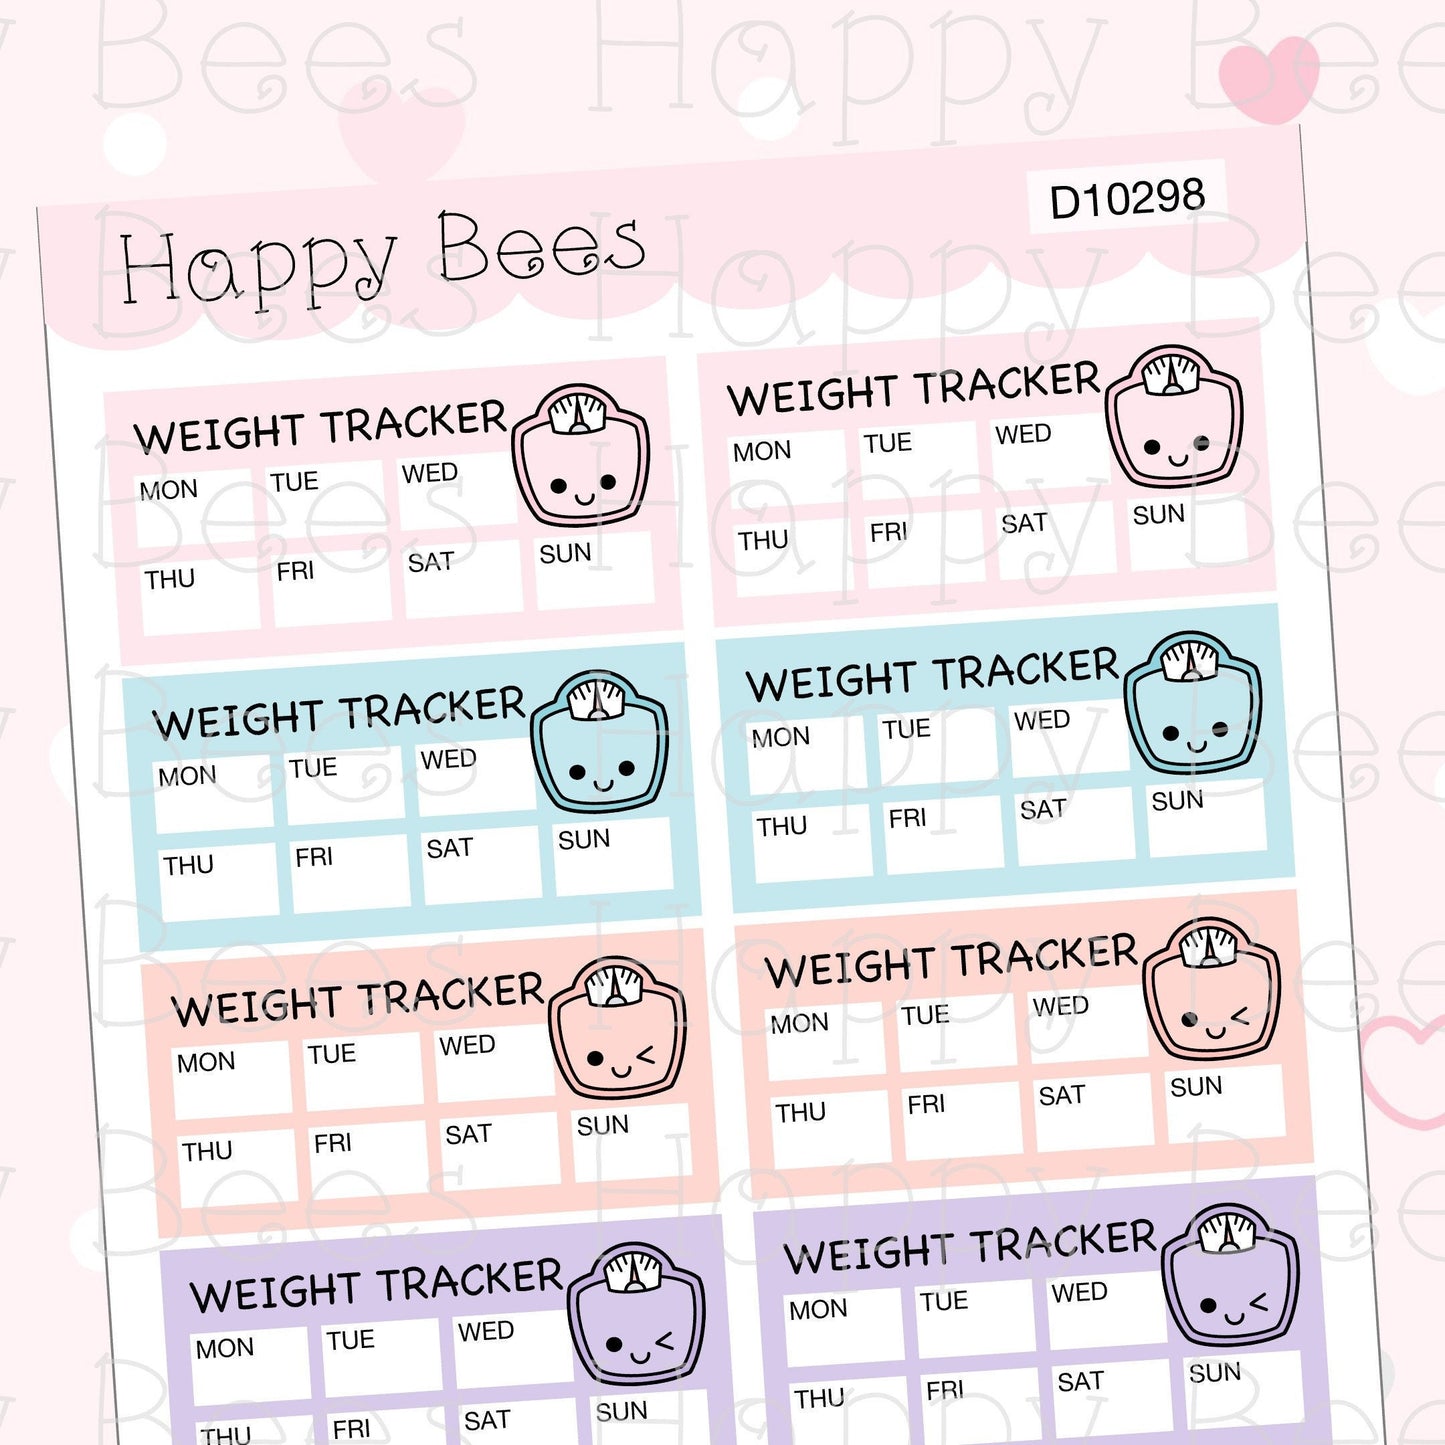 Weight Tracker Boxes - Cute Doodles Health Fitness Functional Planner Stickers D10298